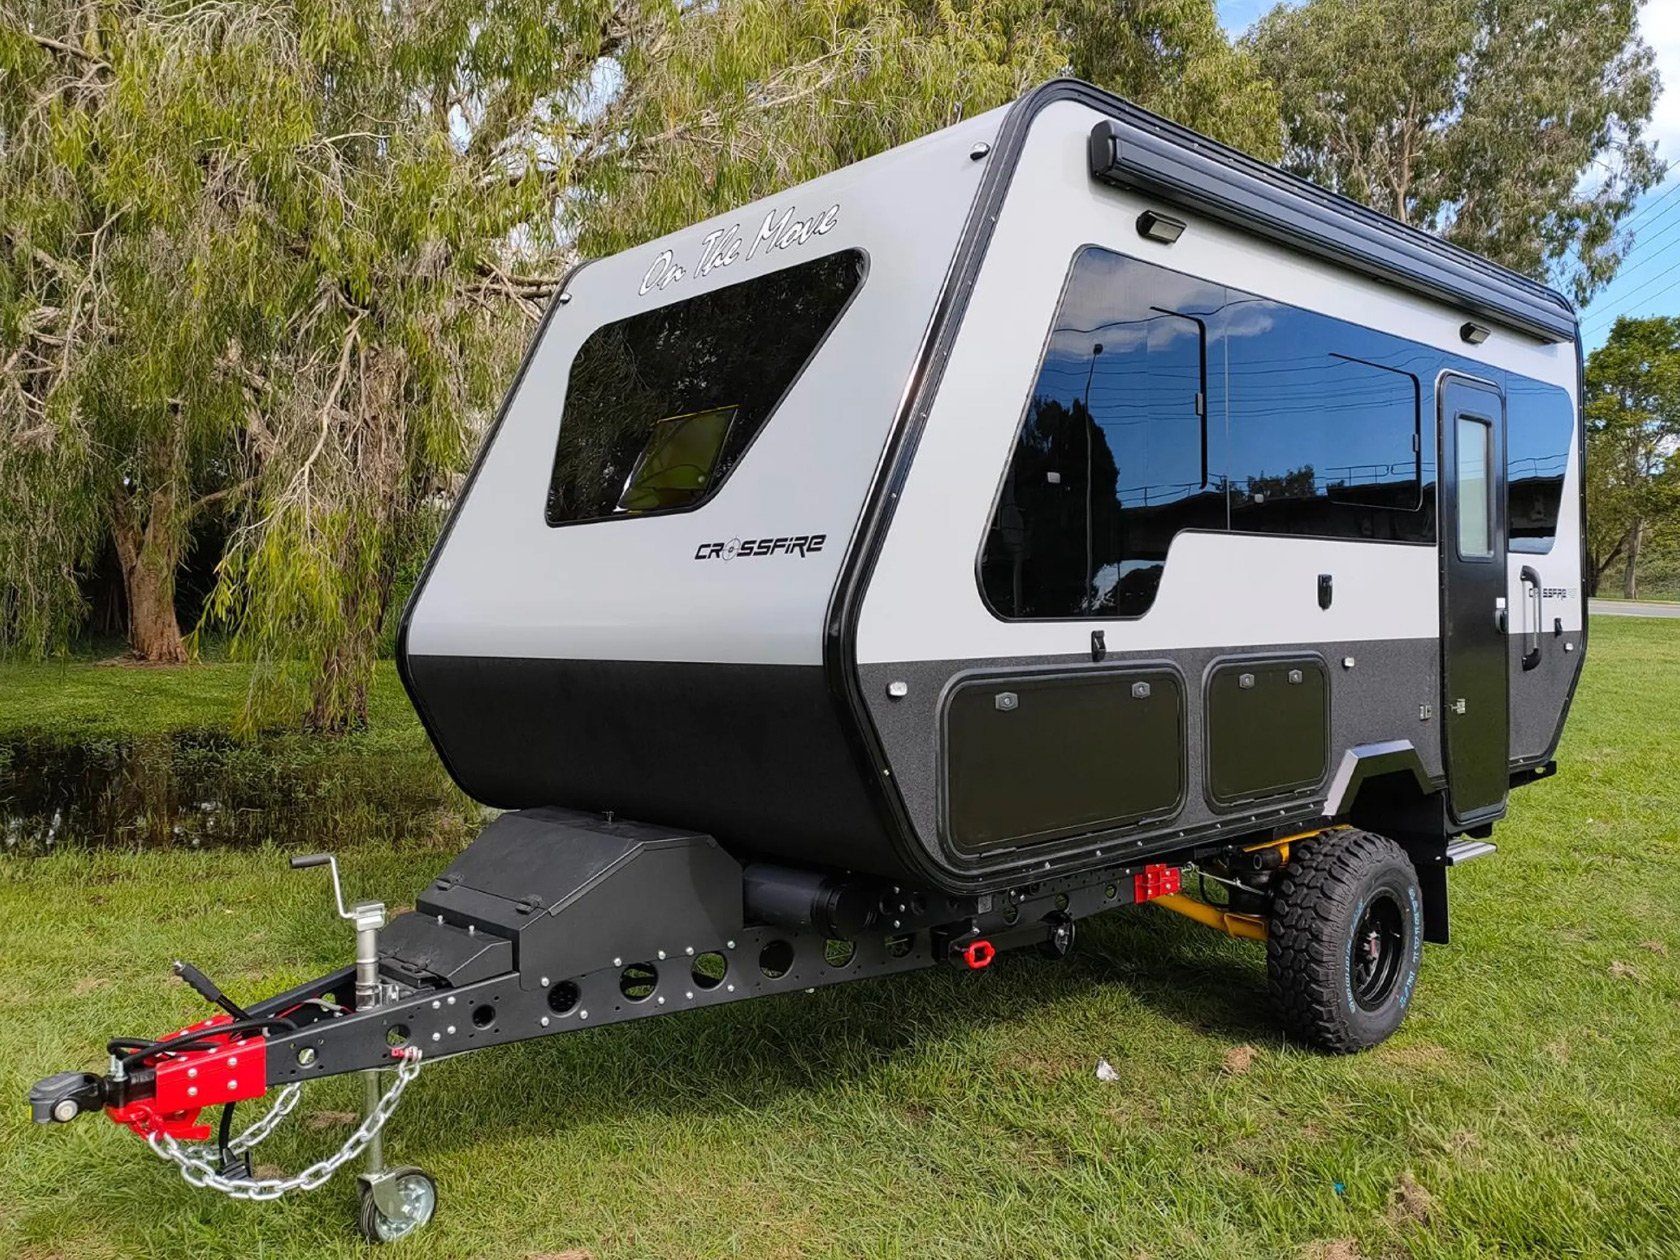 Crossfire 4.7 trailer with dual kitchen and array of windows is crafted for rugged exploration